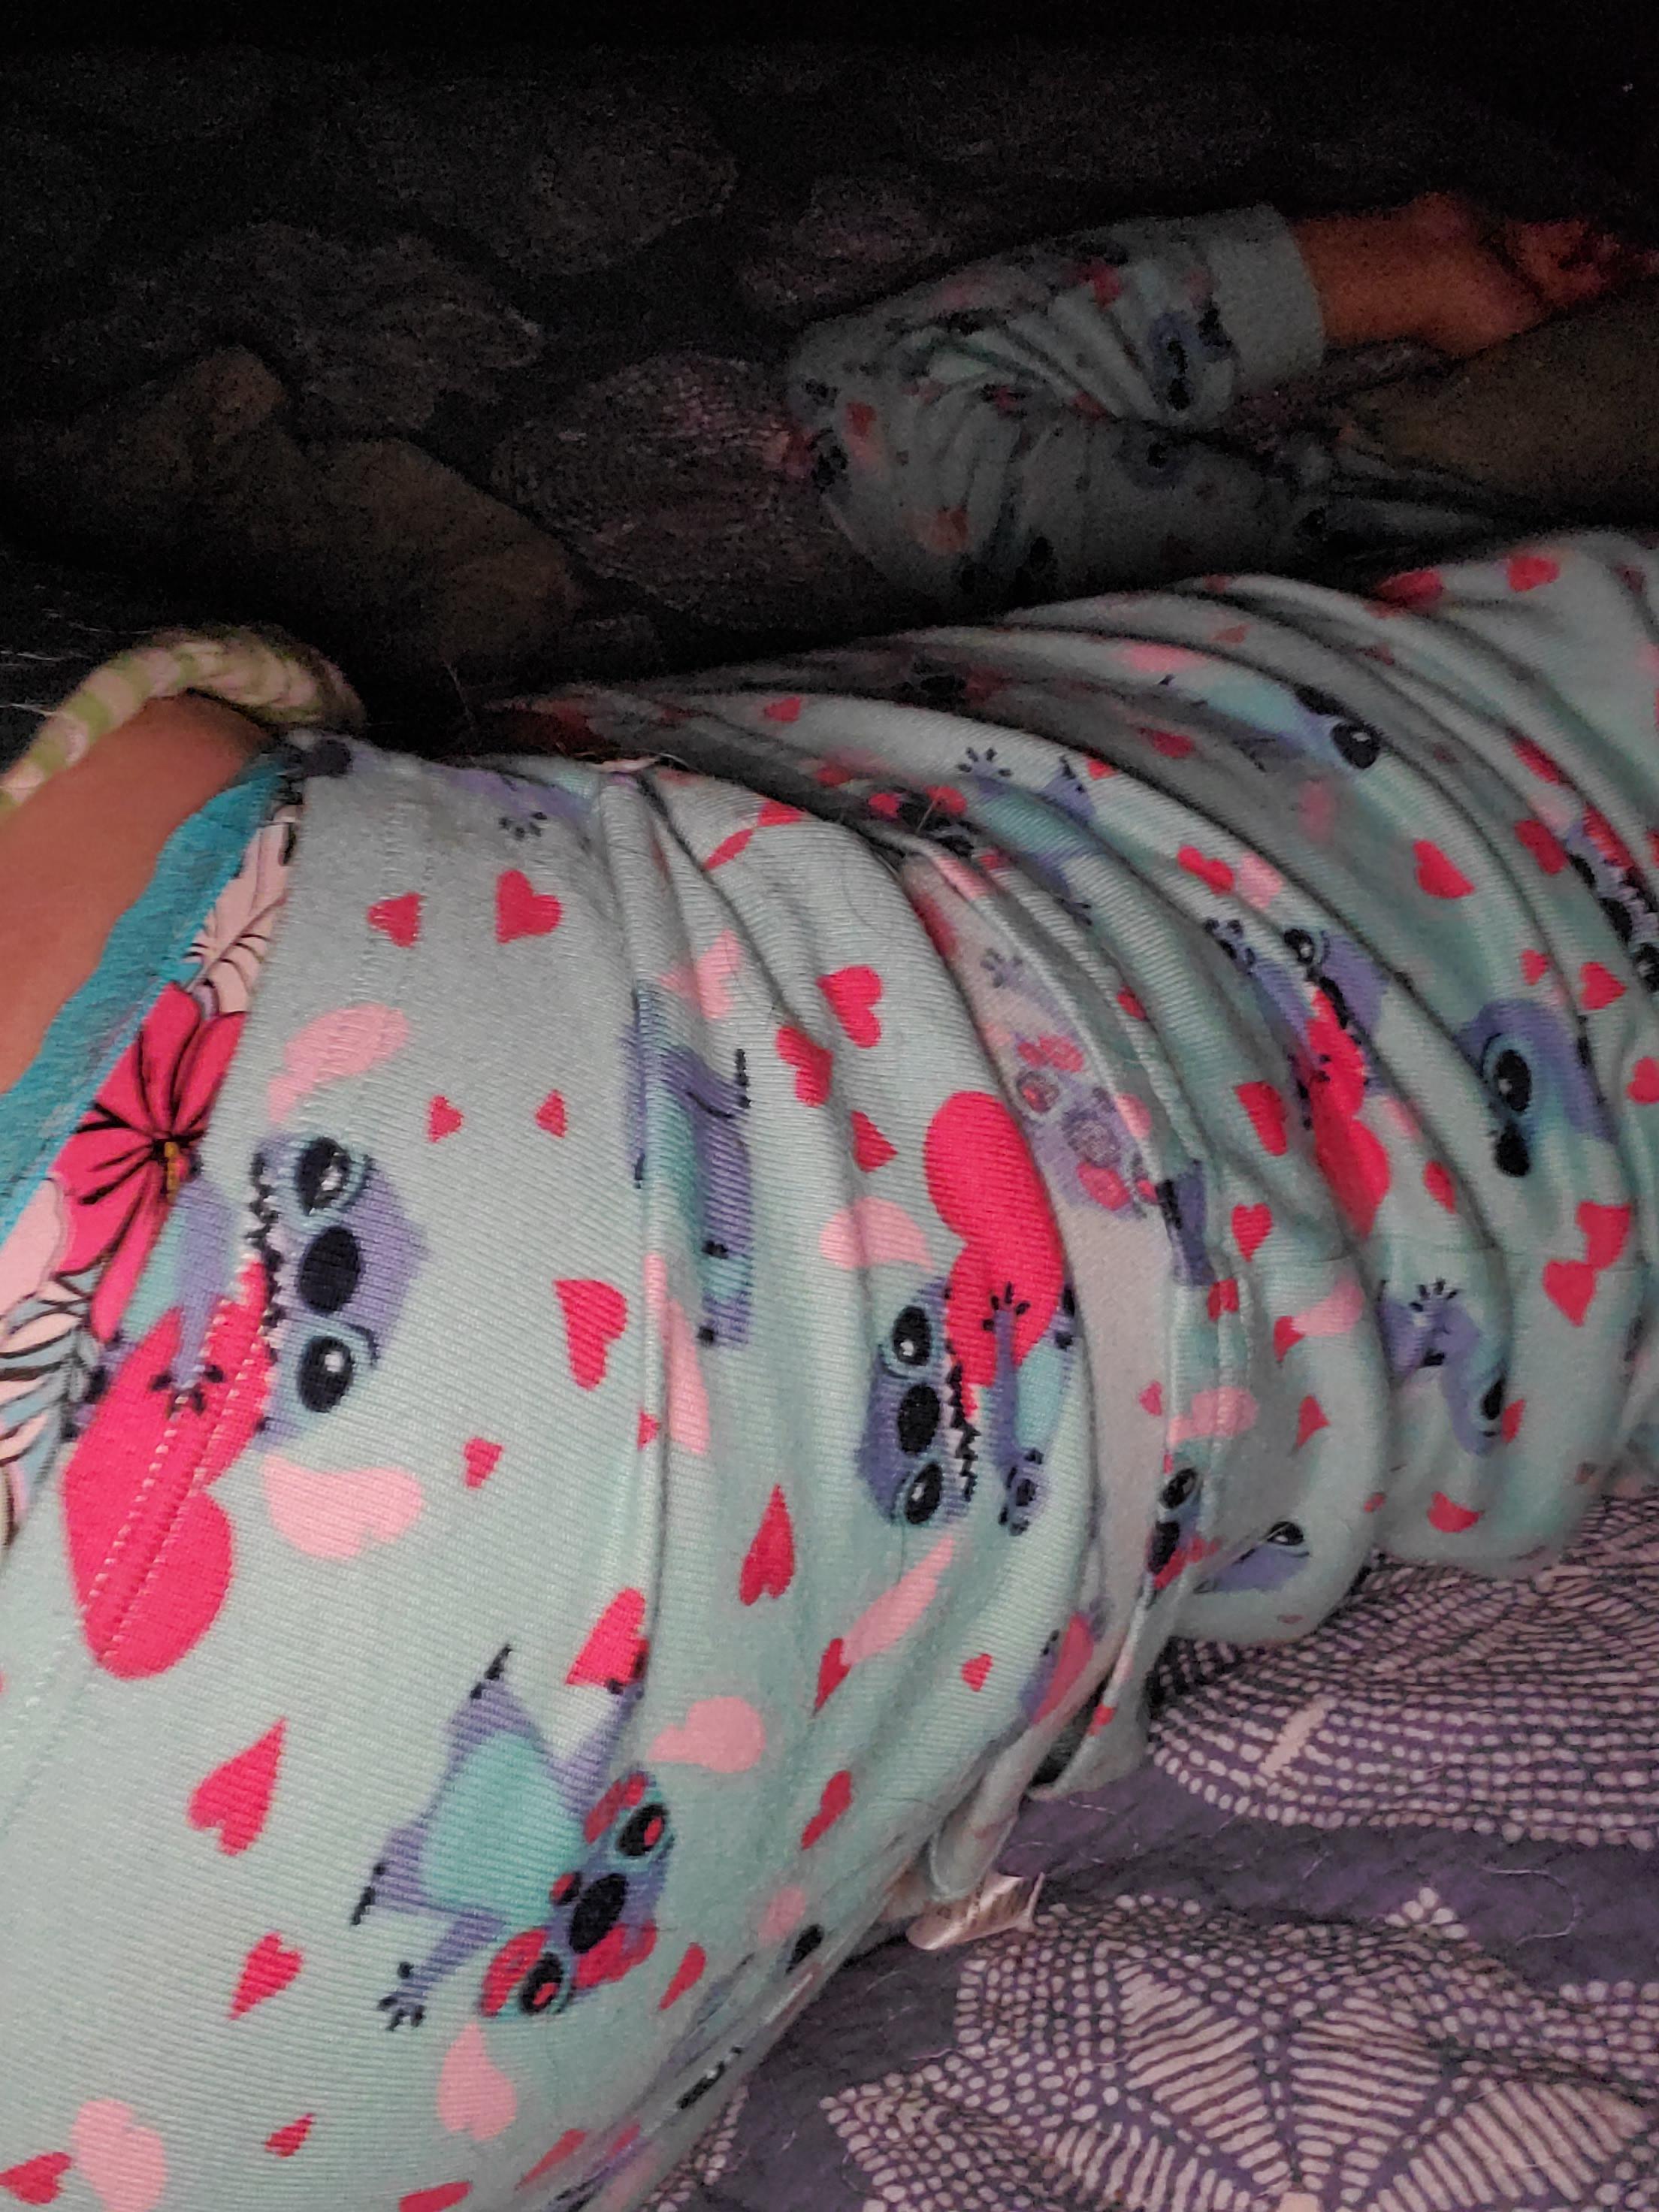 Where Is My Step Brother Or Sister Or Mommy Or Daddy To Come Cuddle Me In My Innocent Pjs They